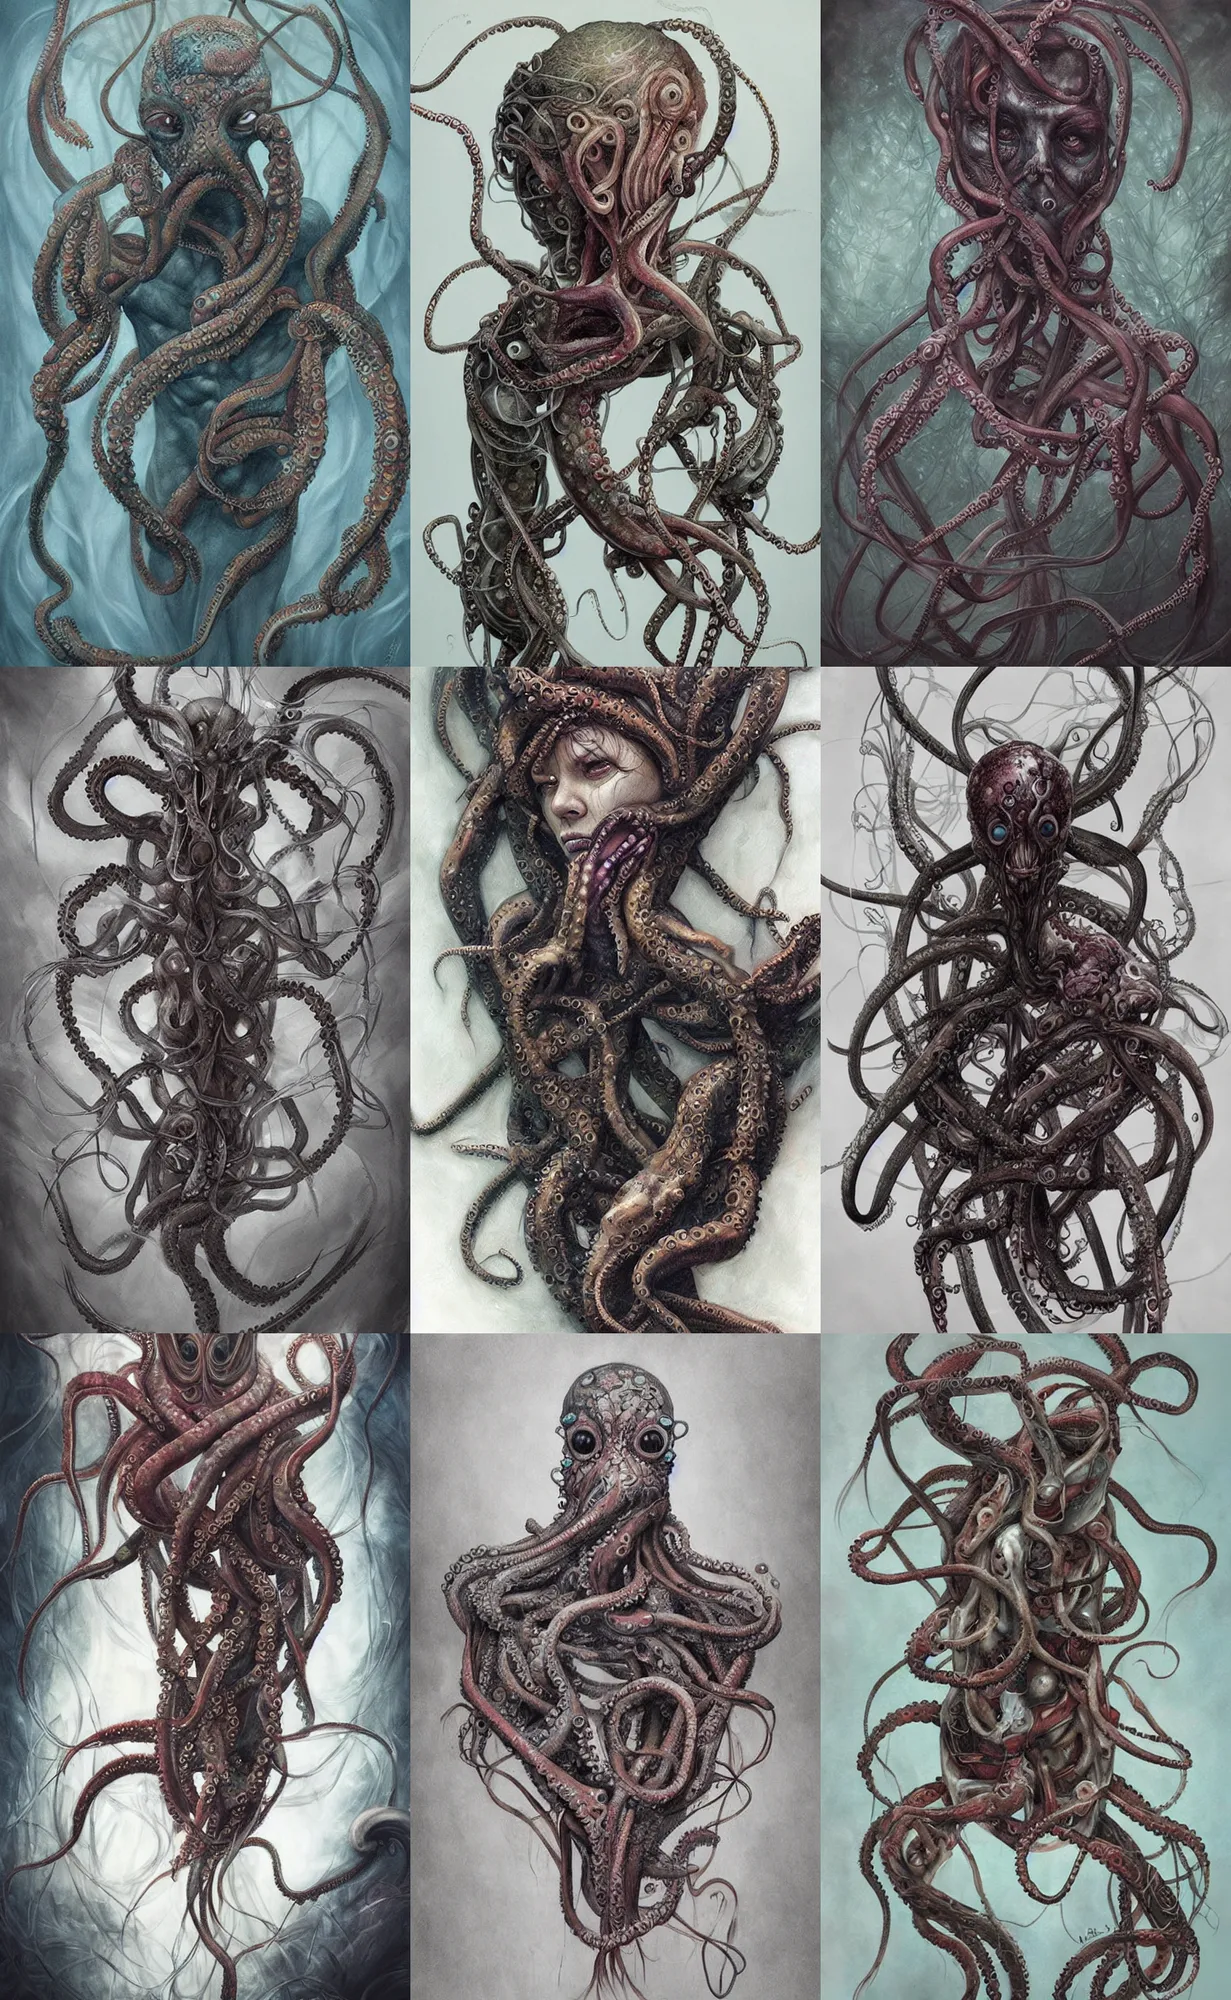 Prompt: Painting, Creative Design, Human octopus hybrid, Biopunk, Body horror, by Marco Mazzoni